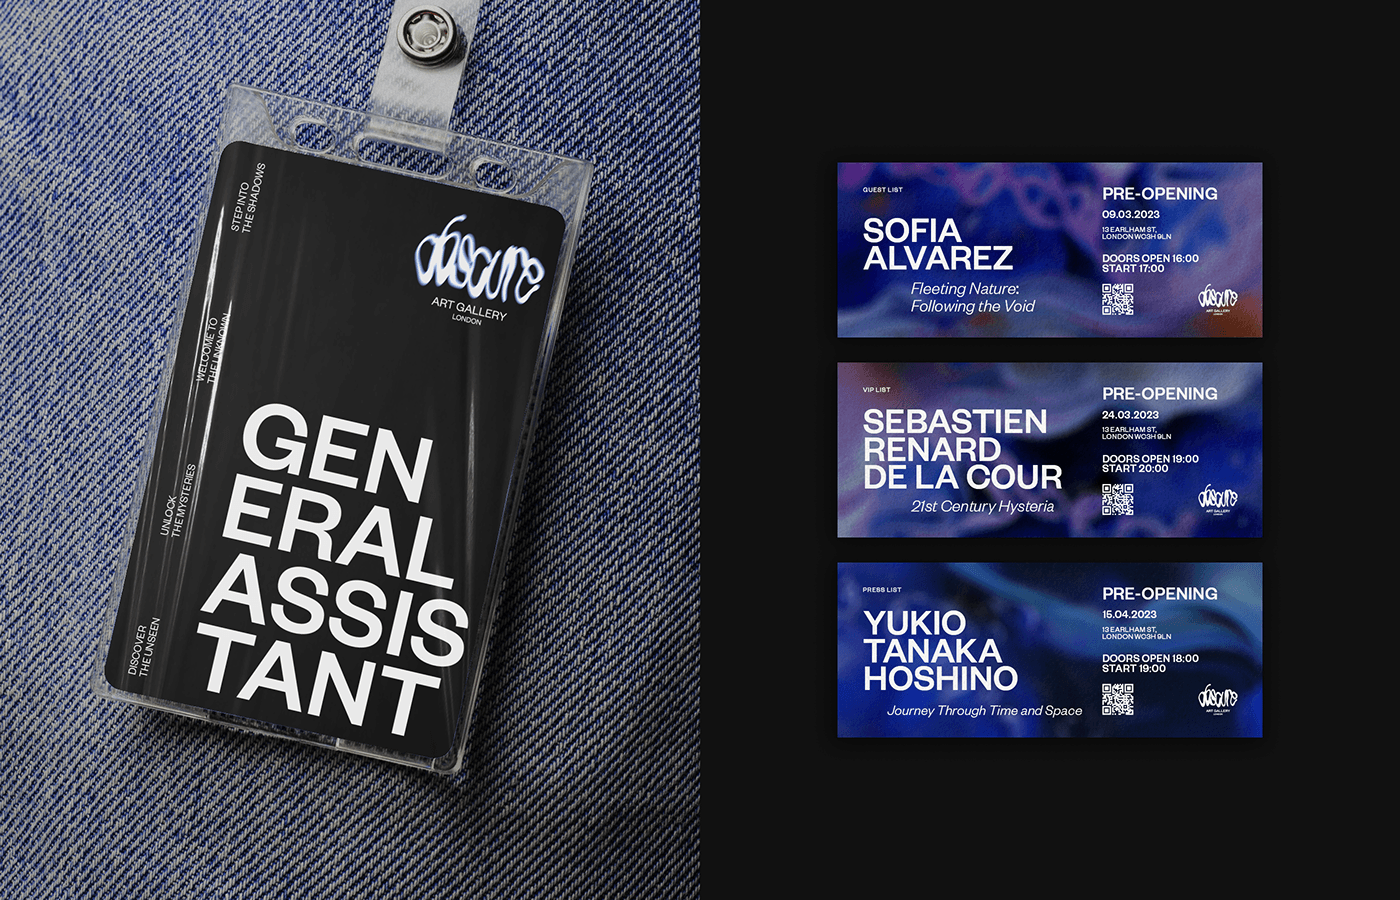 Obscure Art Gallery Visual Identity Design  Id Card and Tickets